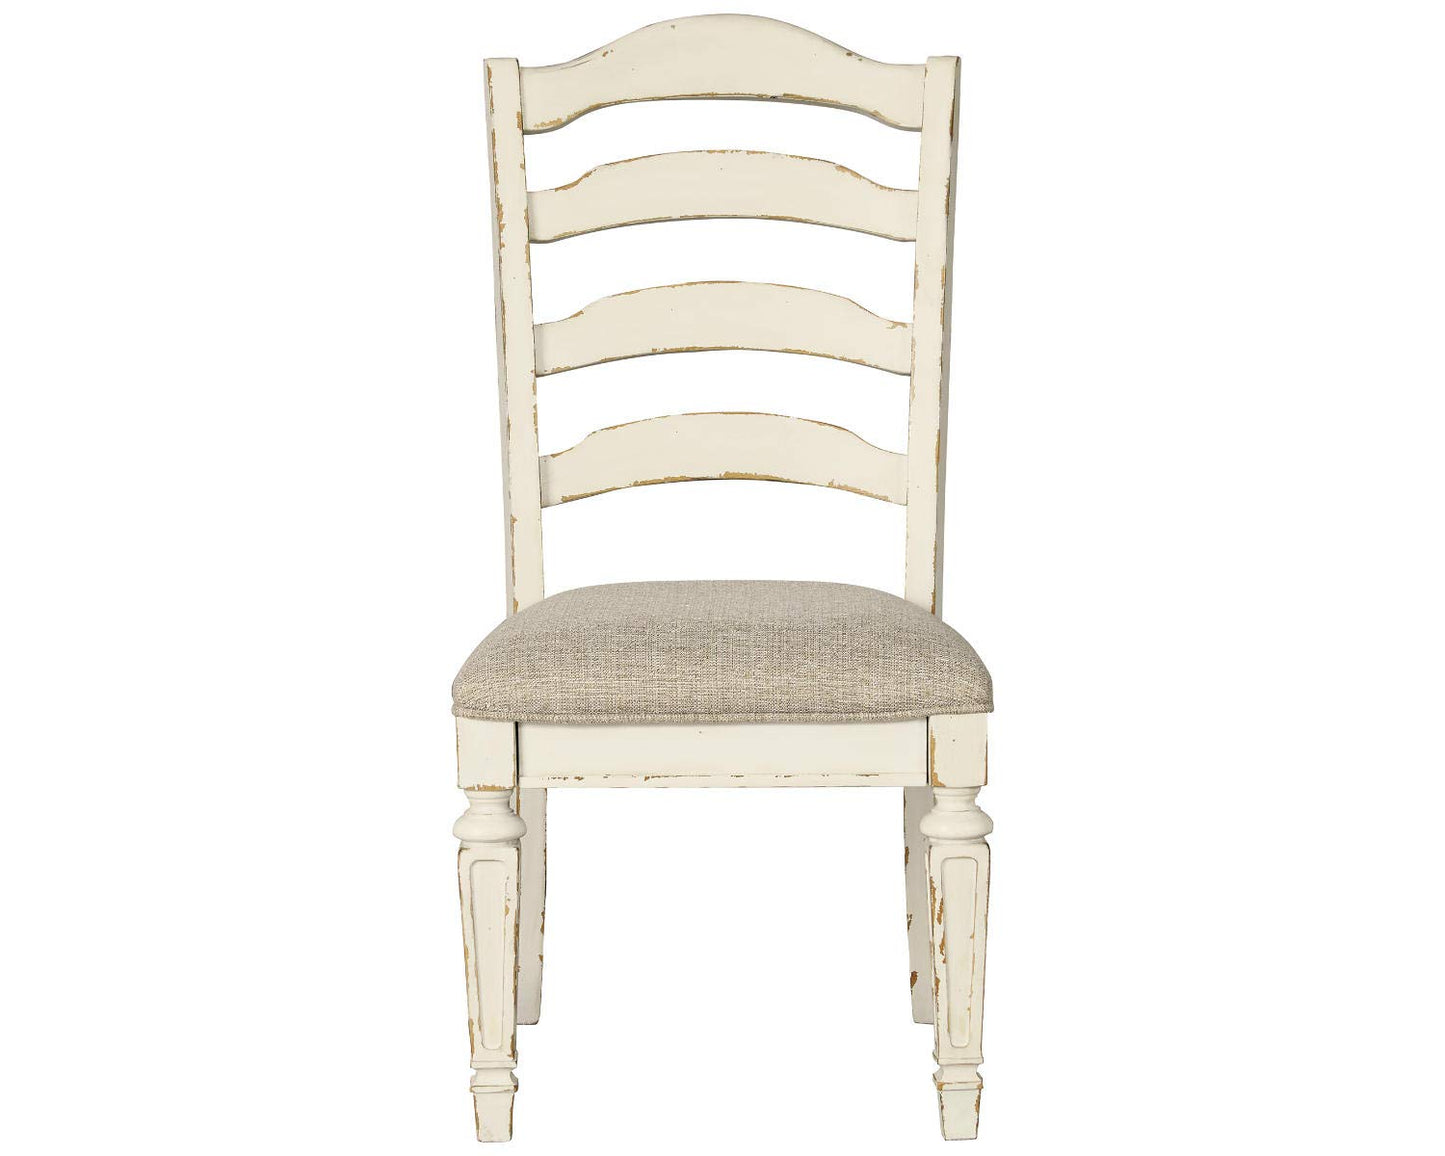 Signature Design by Ashley Realyn Dining Room Upholstered Chair 2 Count, Antique White